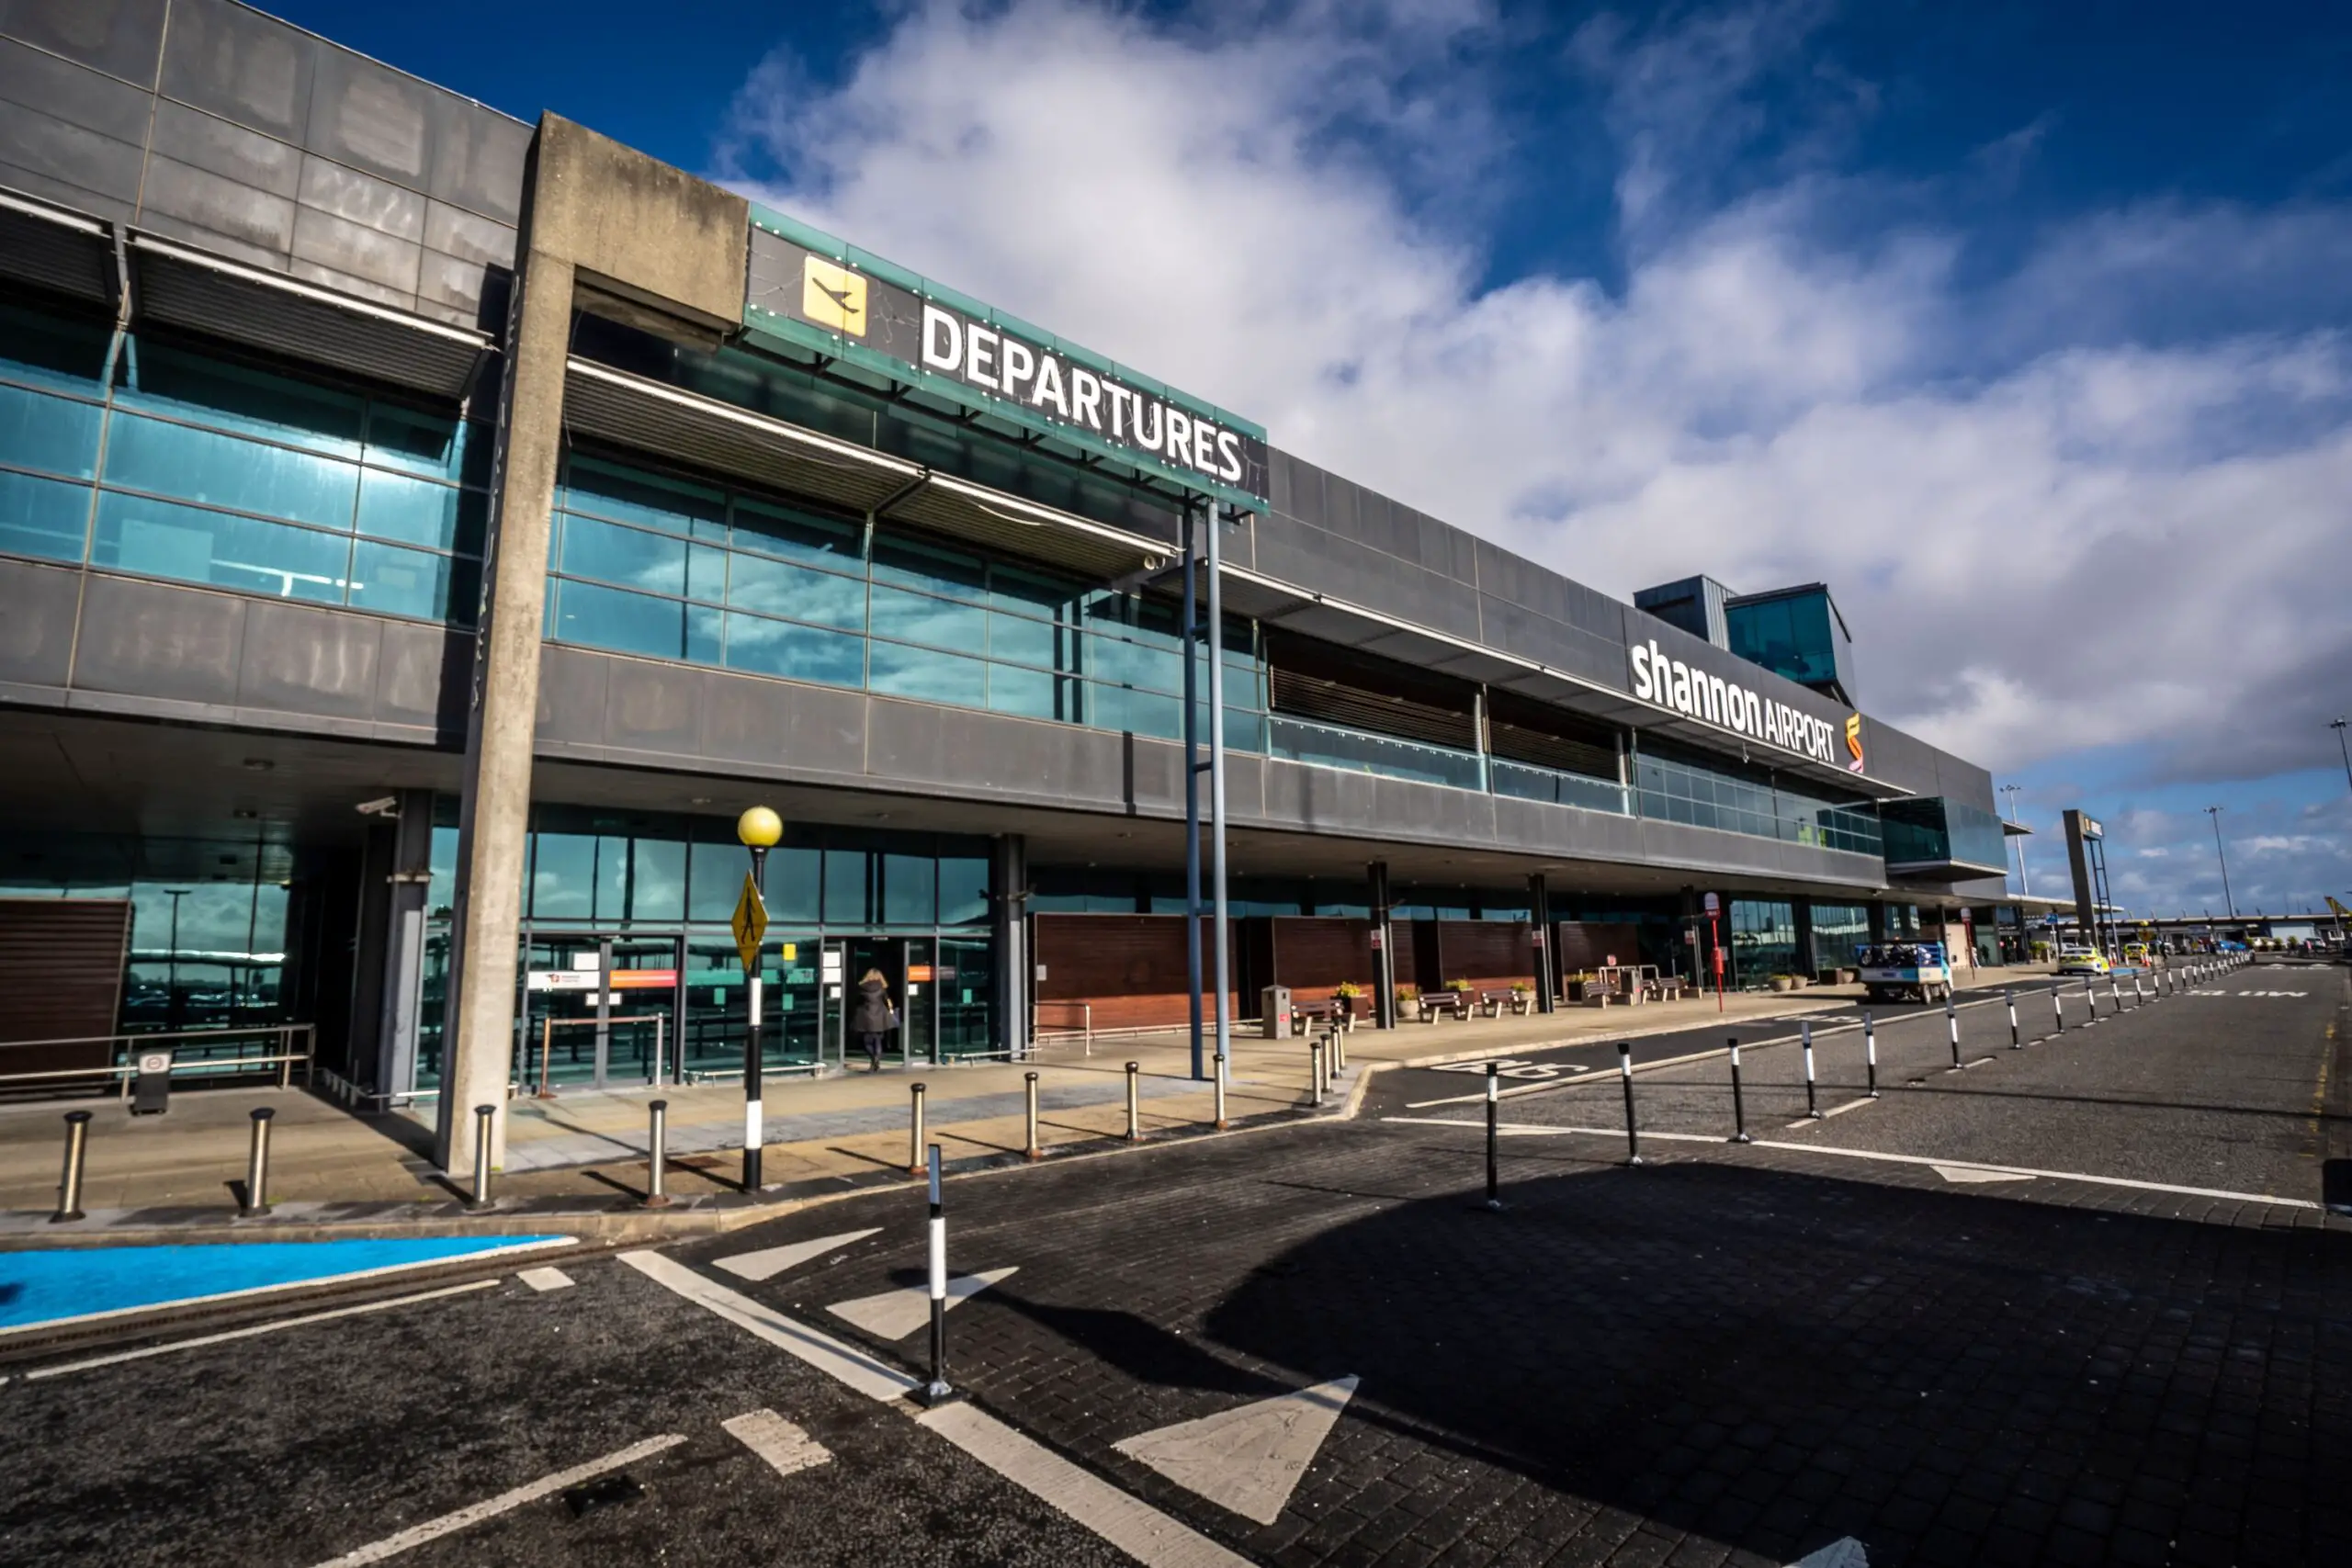 Shannon Airport’s summer campaign shortlisted for digital marketing award